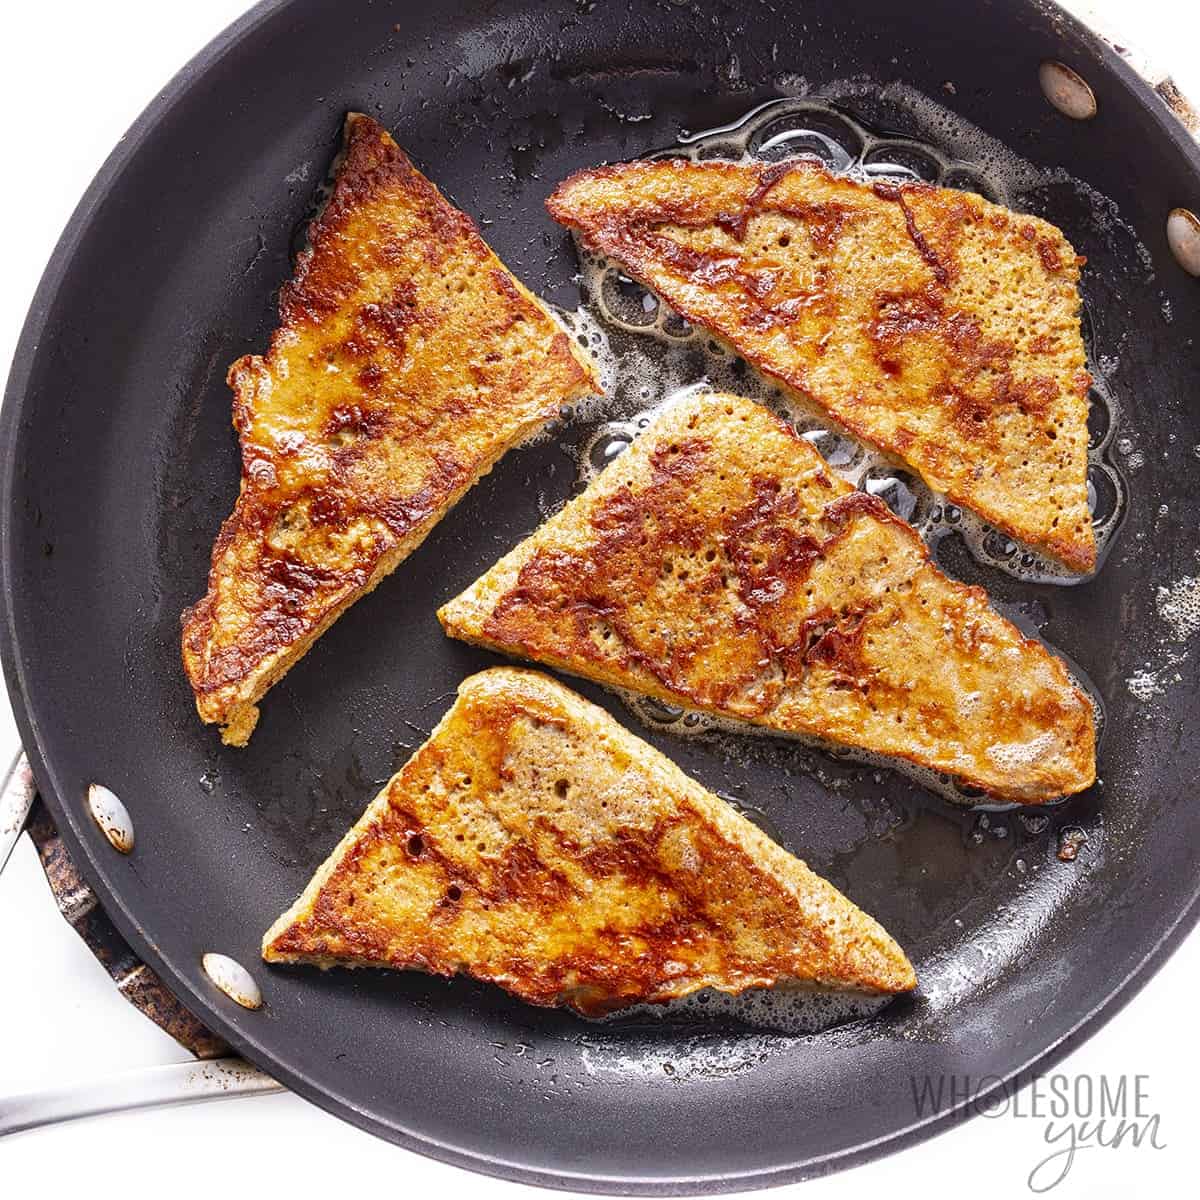 Keto French toast cooking in pan